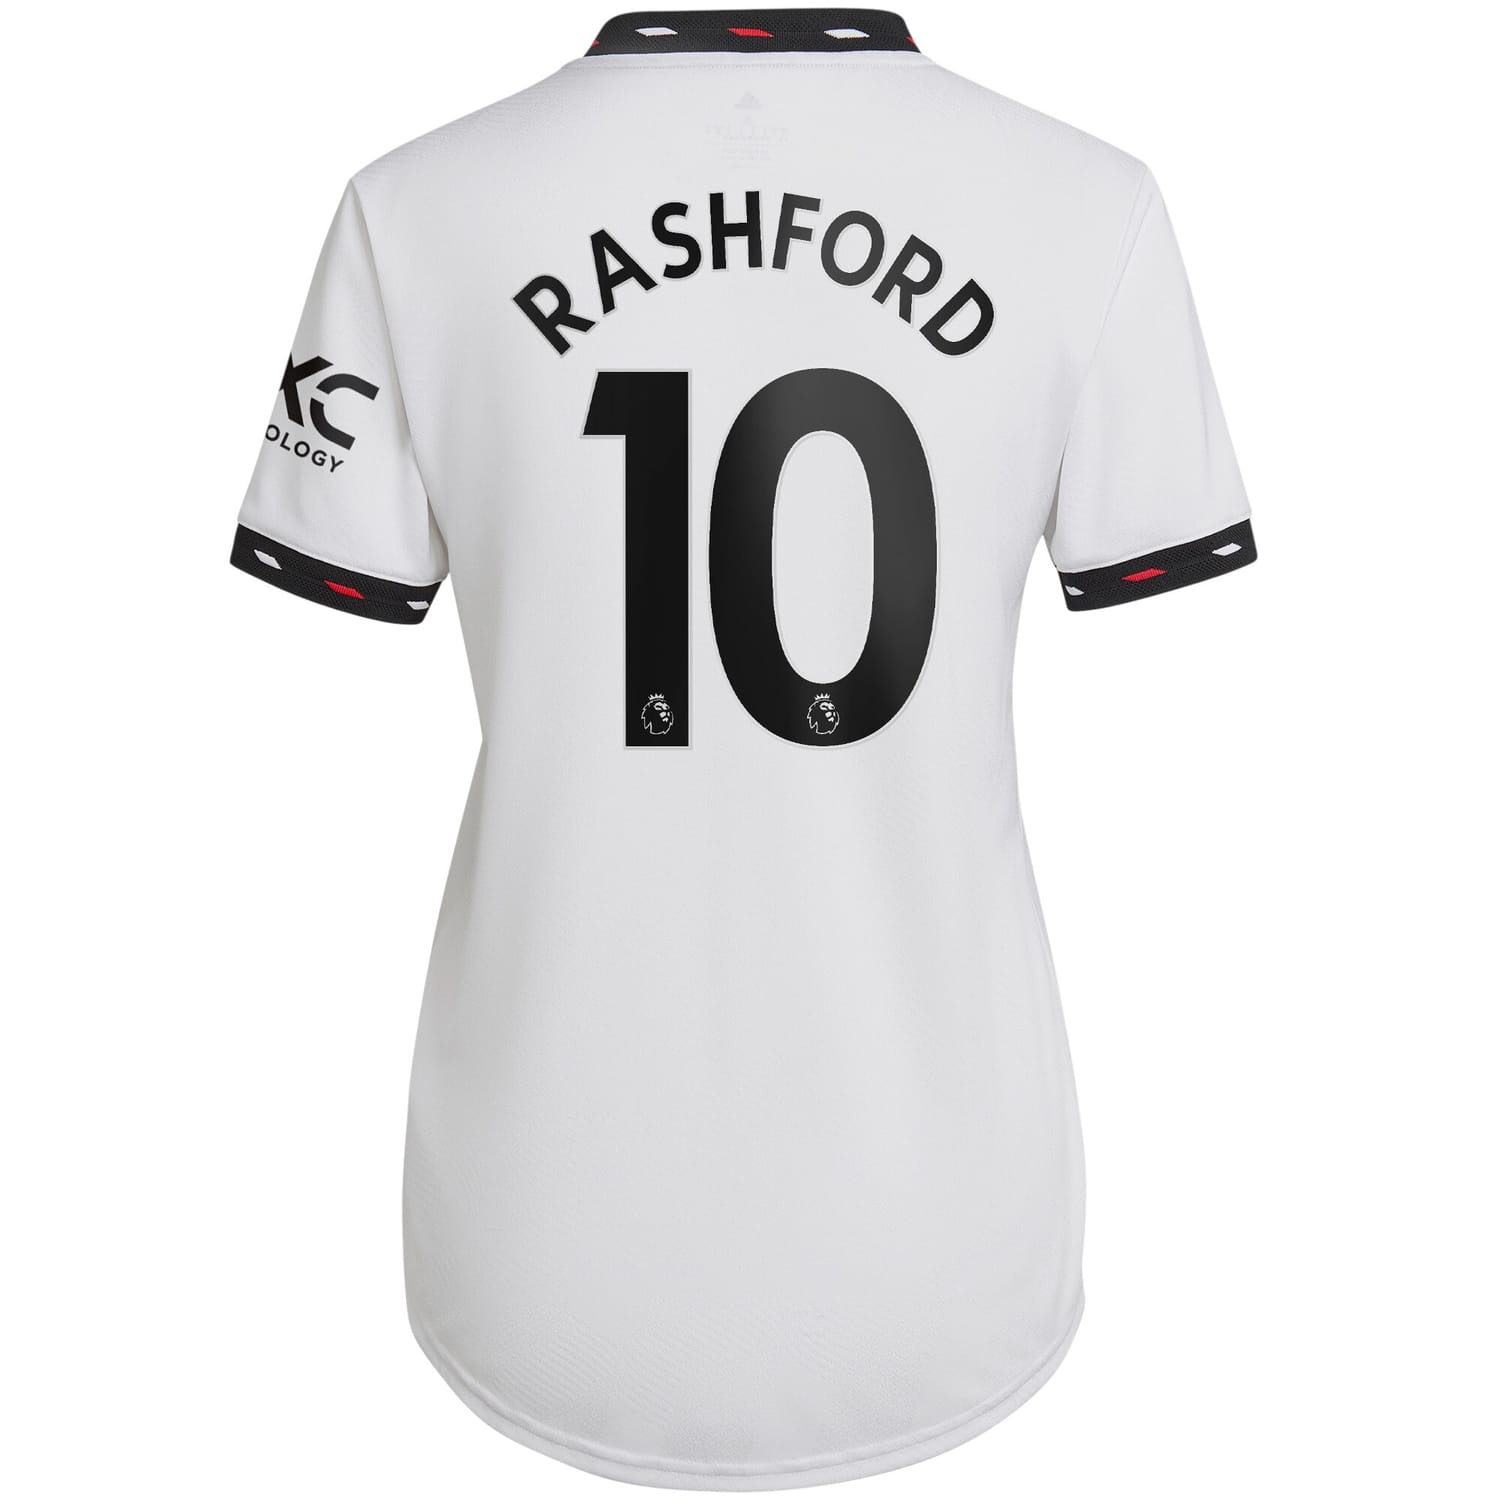 Premier League Manchester United Away Authentic Jersey Shirt 2022-23 player Marcus Rashford 10 printing for Women